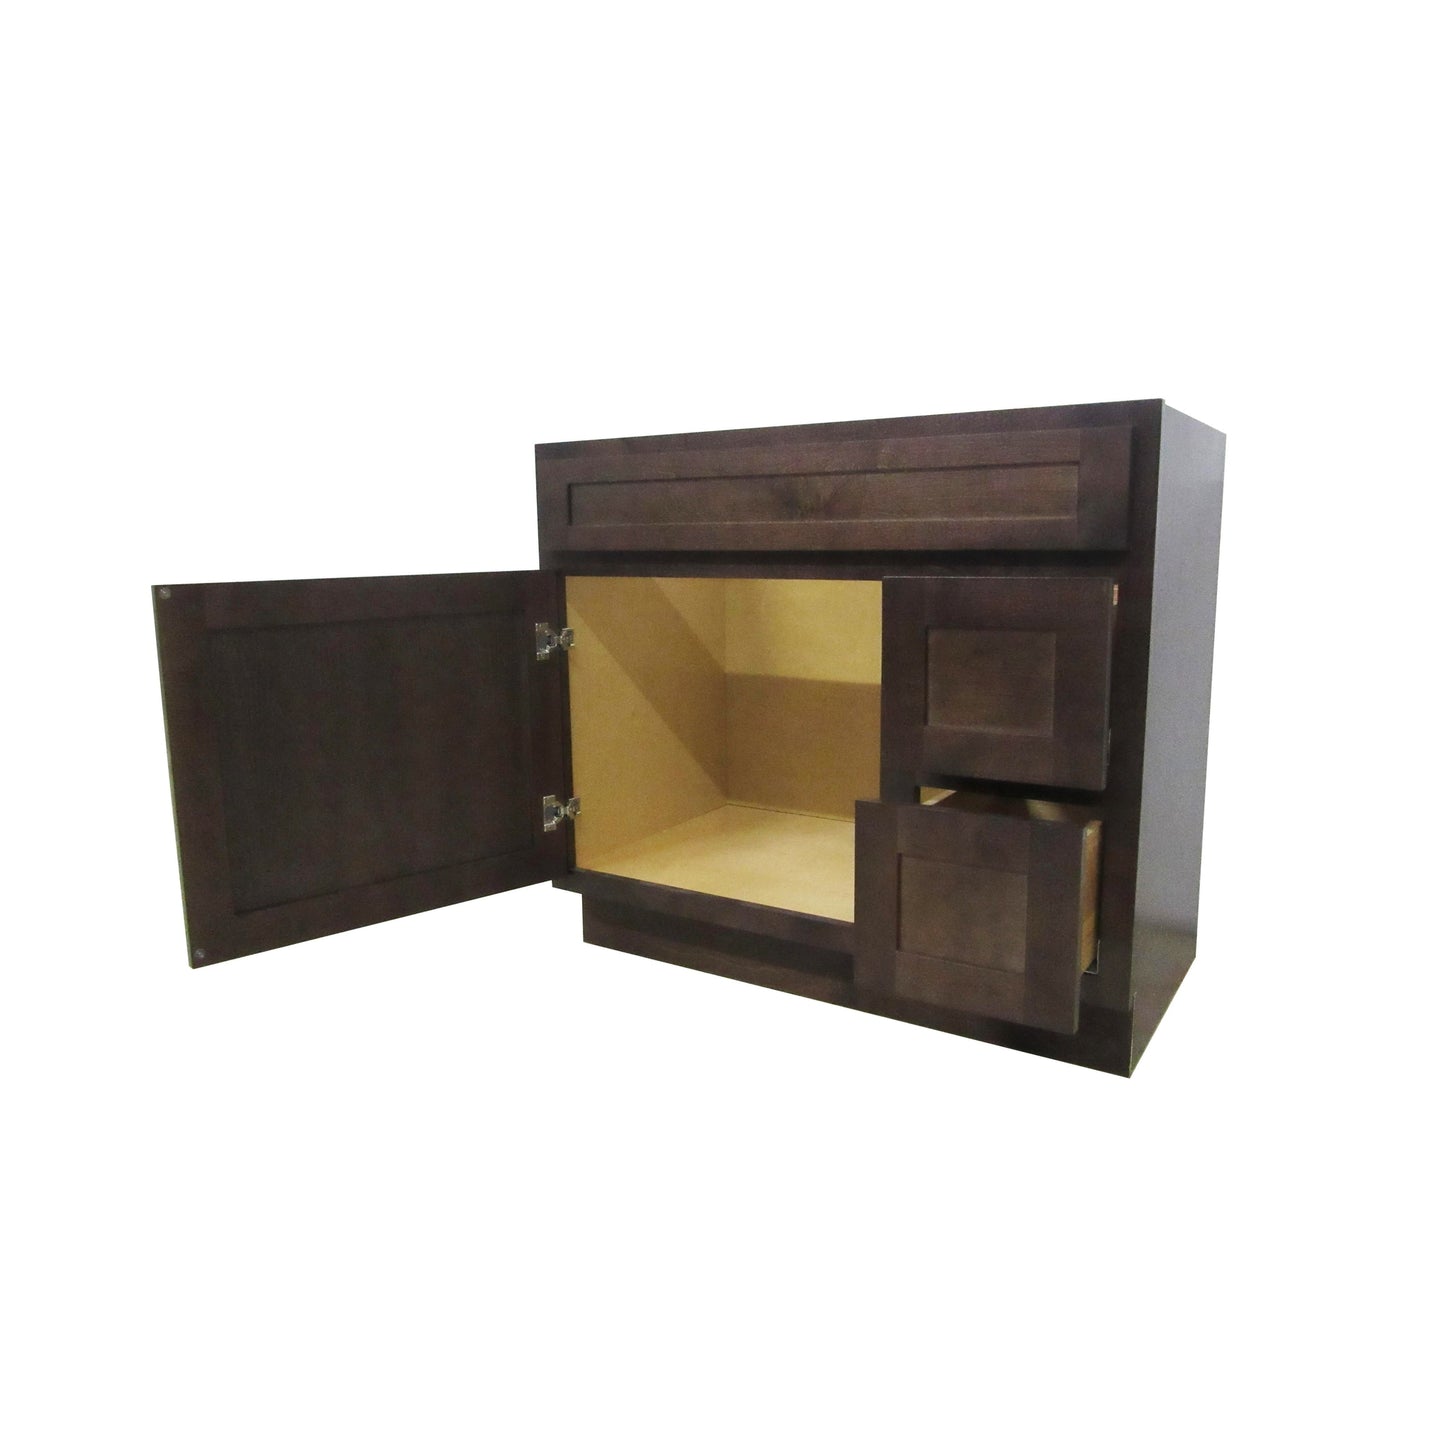 Vanity Art 36" Brown Freestanding Solid Wood Vanity Cabinet With Single Soft Closing Door and 2 Right Drawers